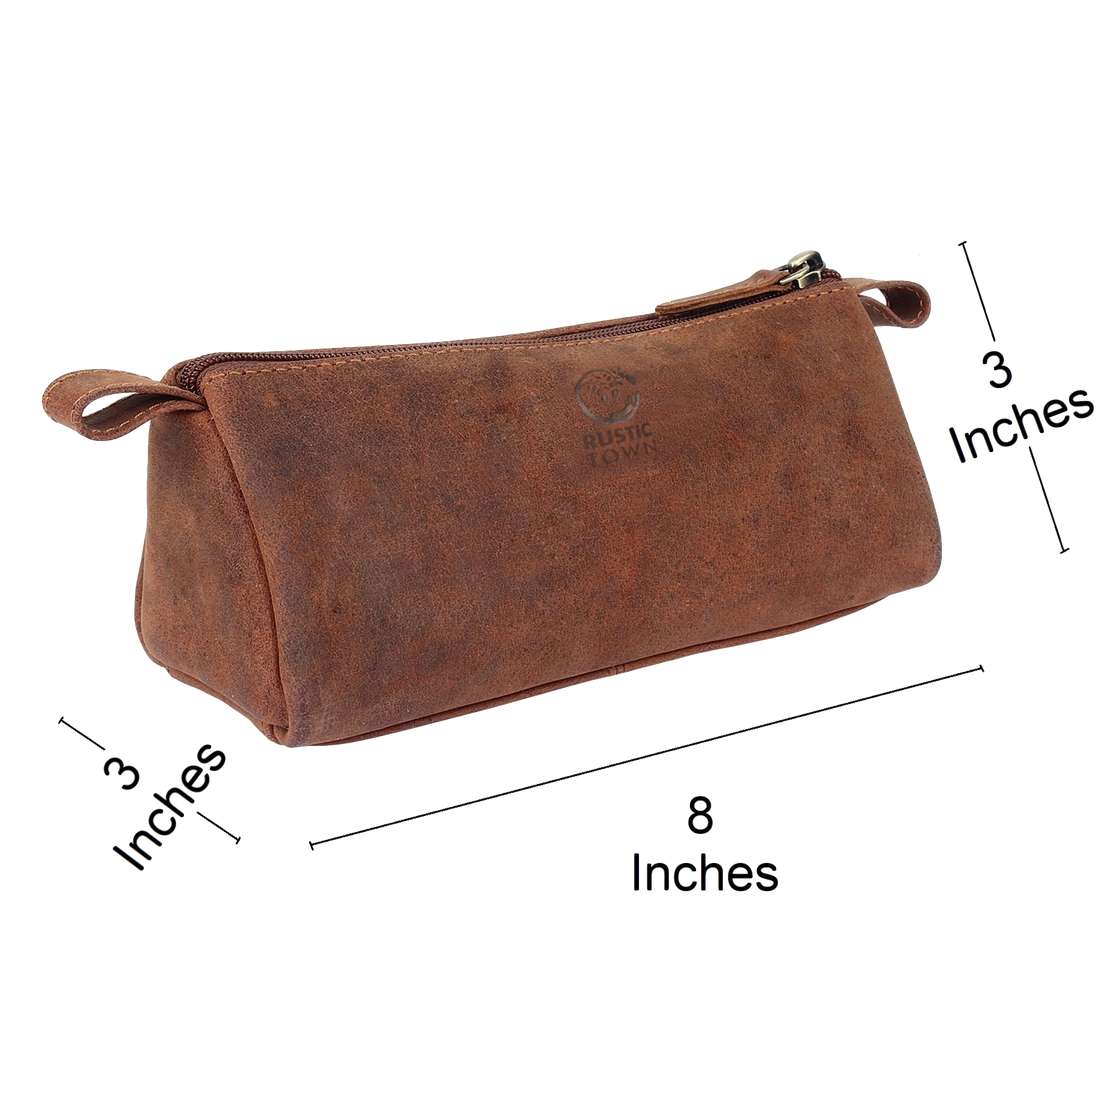 RUSTIC TOWN Leather Pencil Pouch - Zippered Pen Case for Work & Office ( Brown)